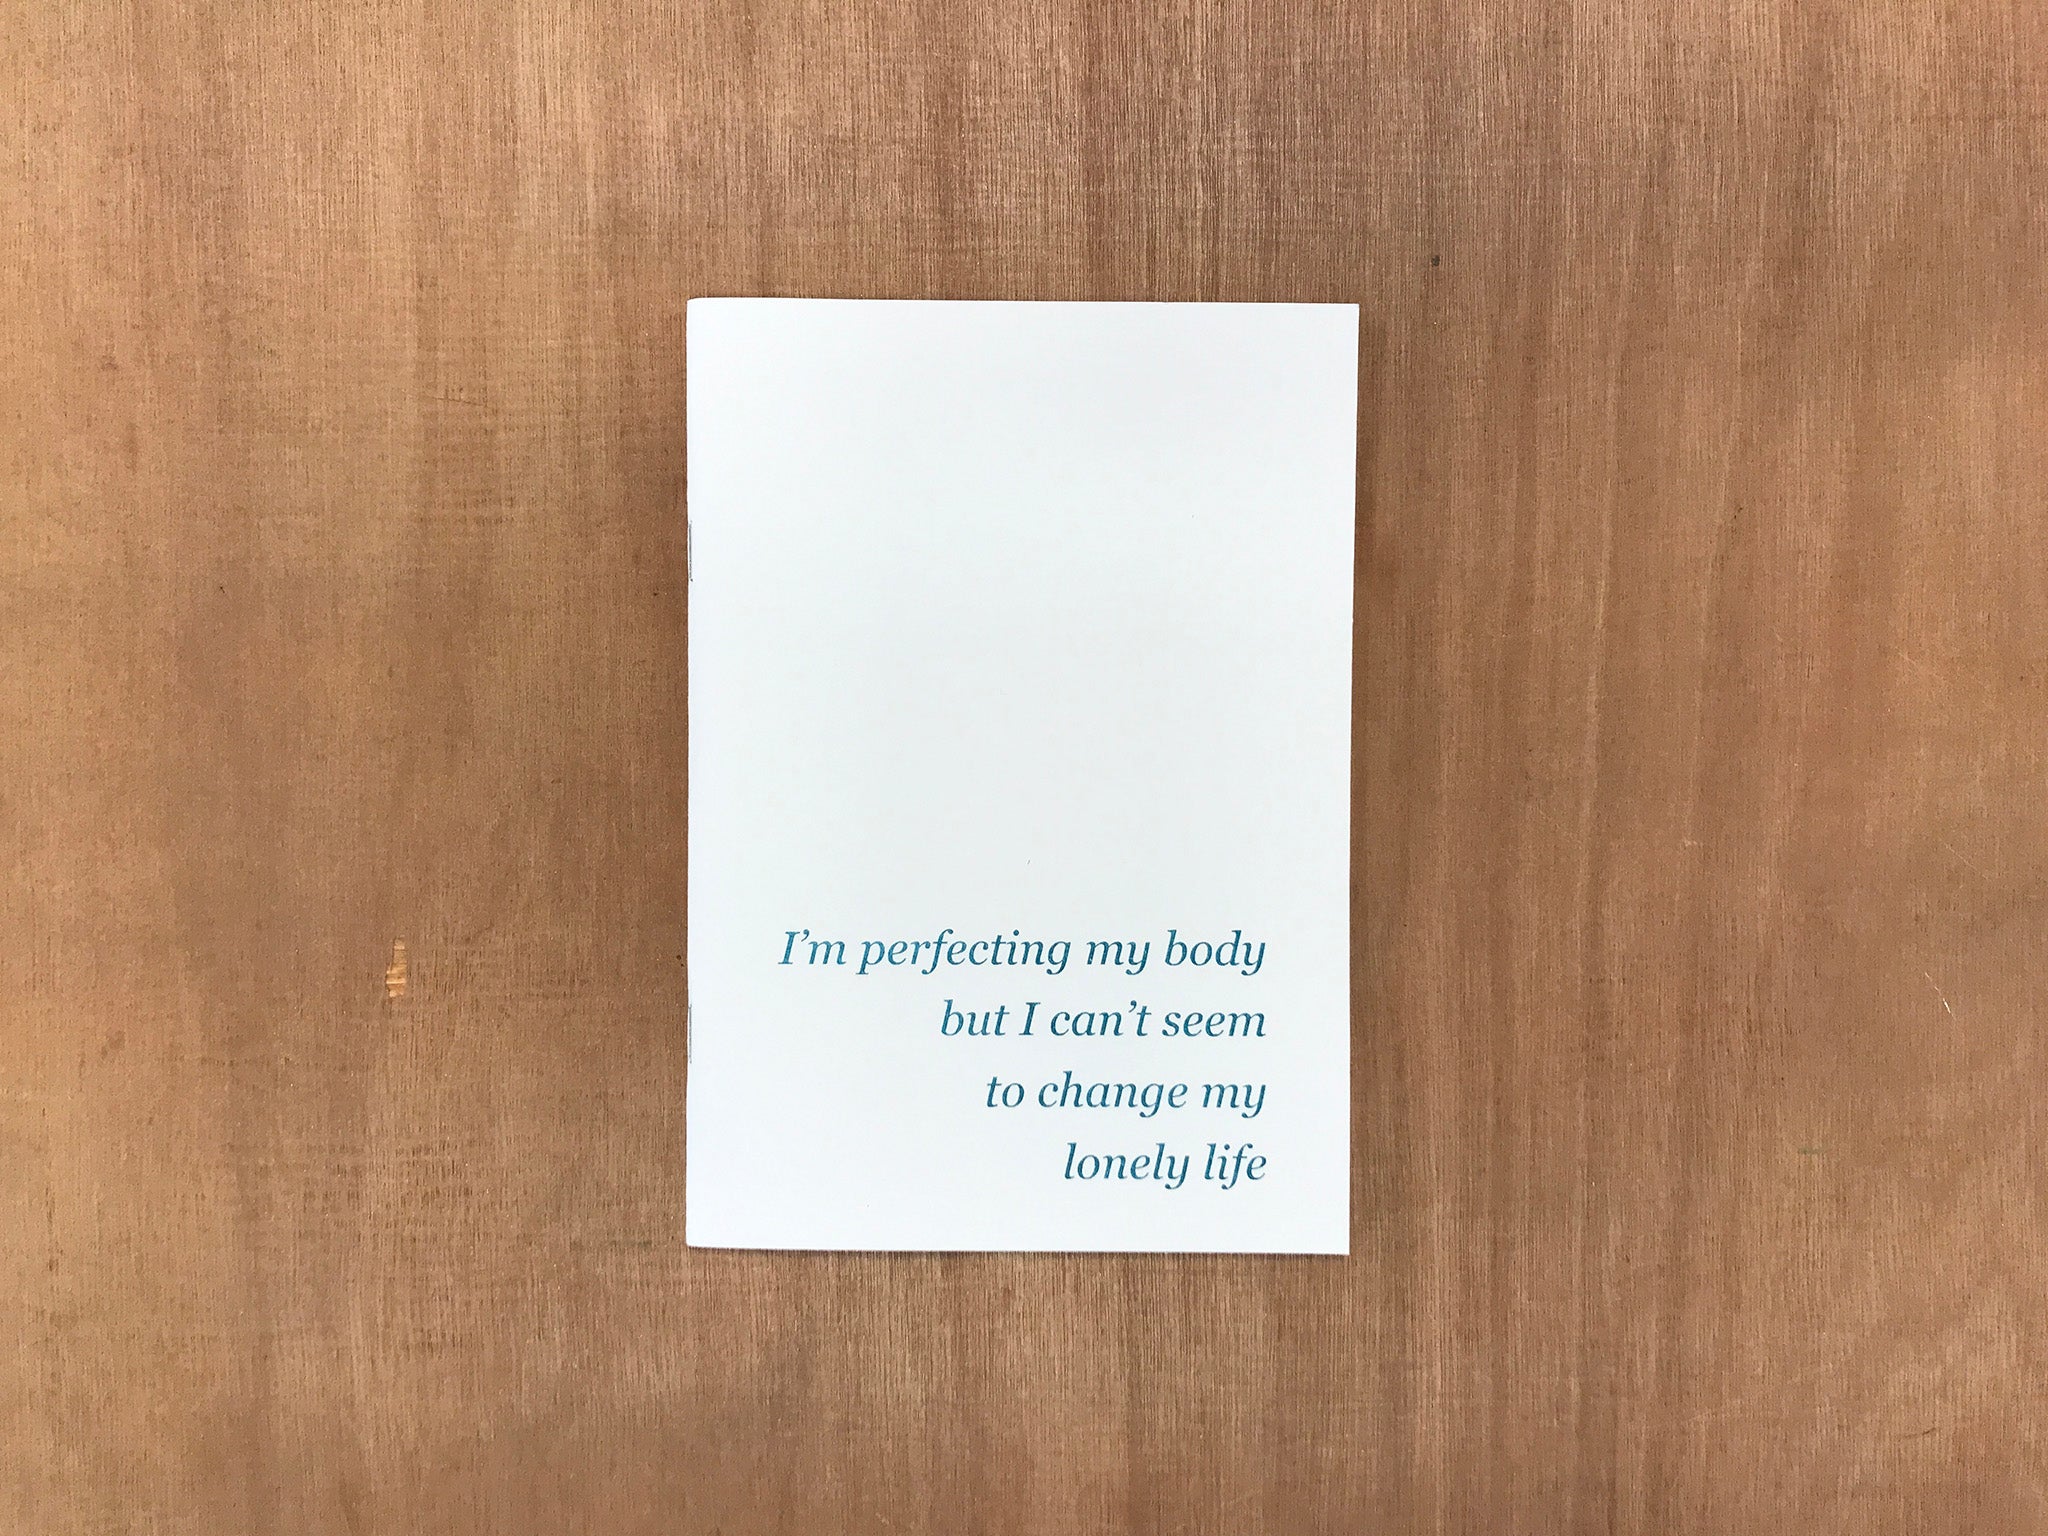 I'M PERFECTING MY BODY BUT I CAN'T SEEM TO CHANGE MY LONELY LIFE by Samuel Brzeski